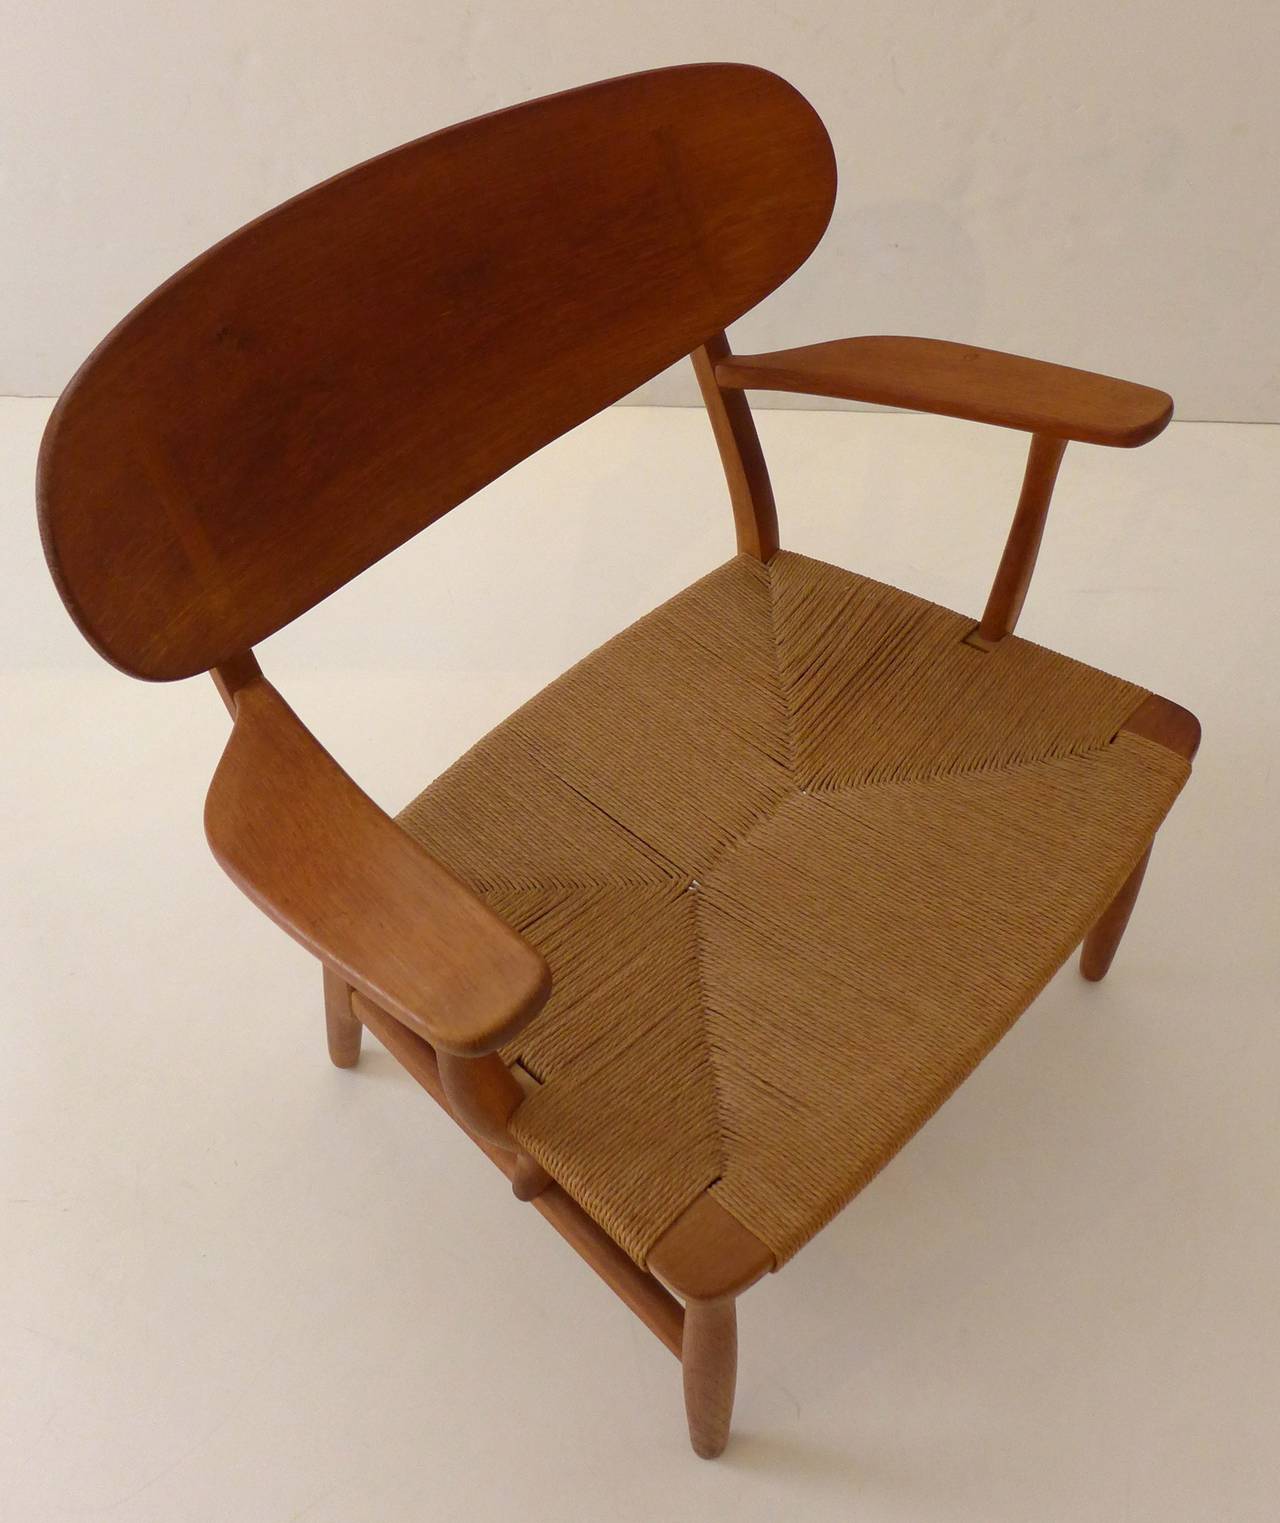 Carved Hans Wegner CH-22 Lounge Chair